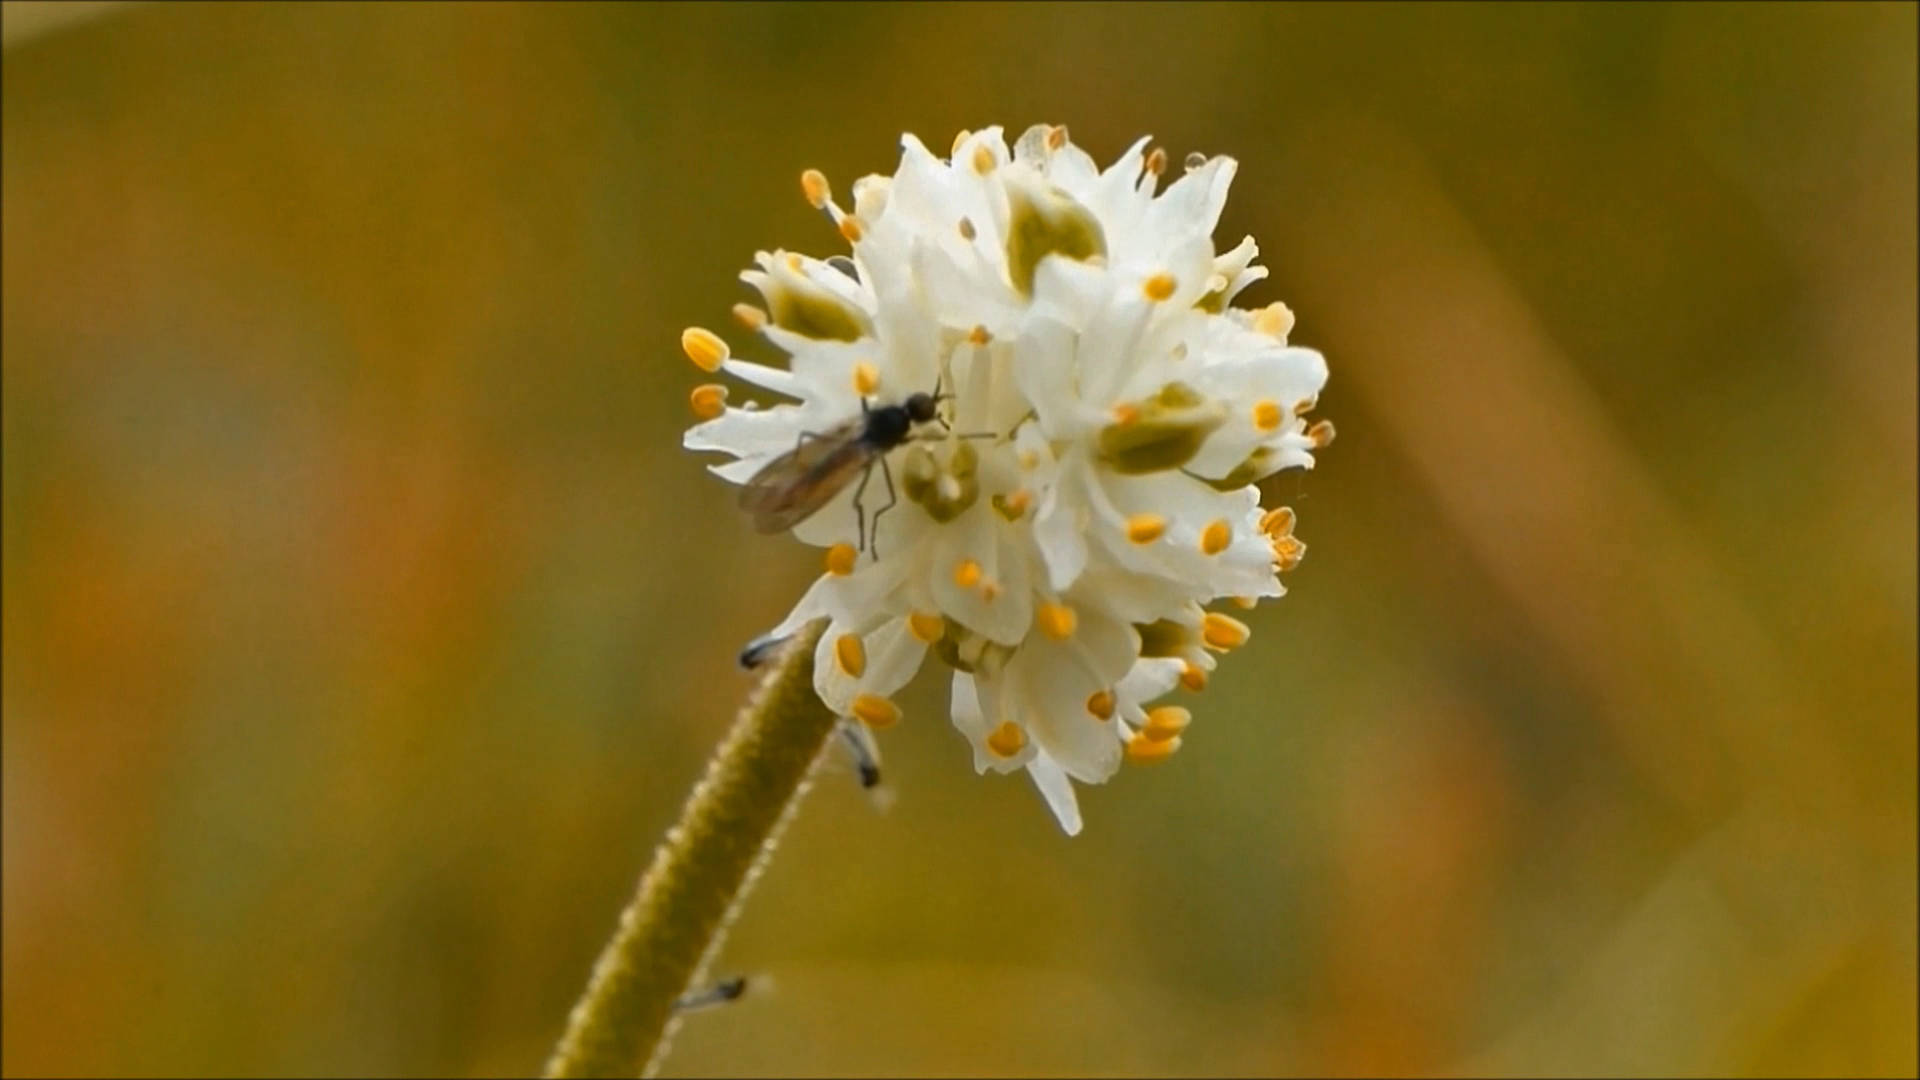 The small white flowers of sticky asphodel may be pollinated by small flies. (Courtesy Photo / Bob Armstrong)